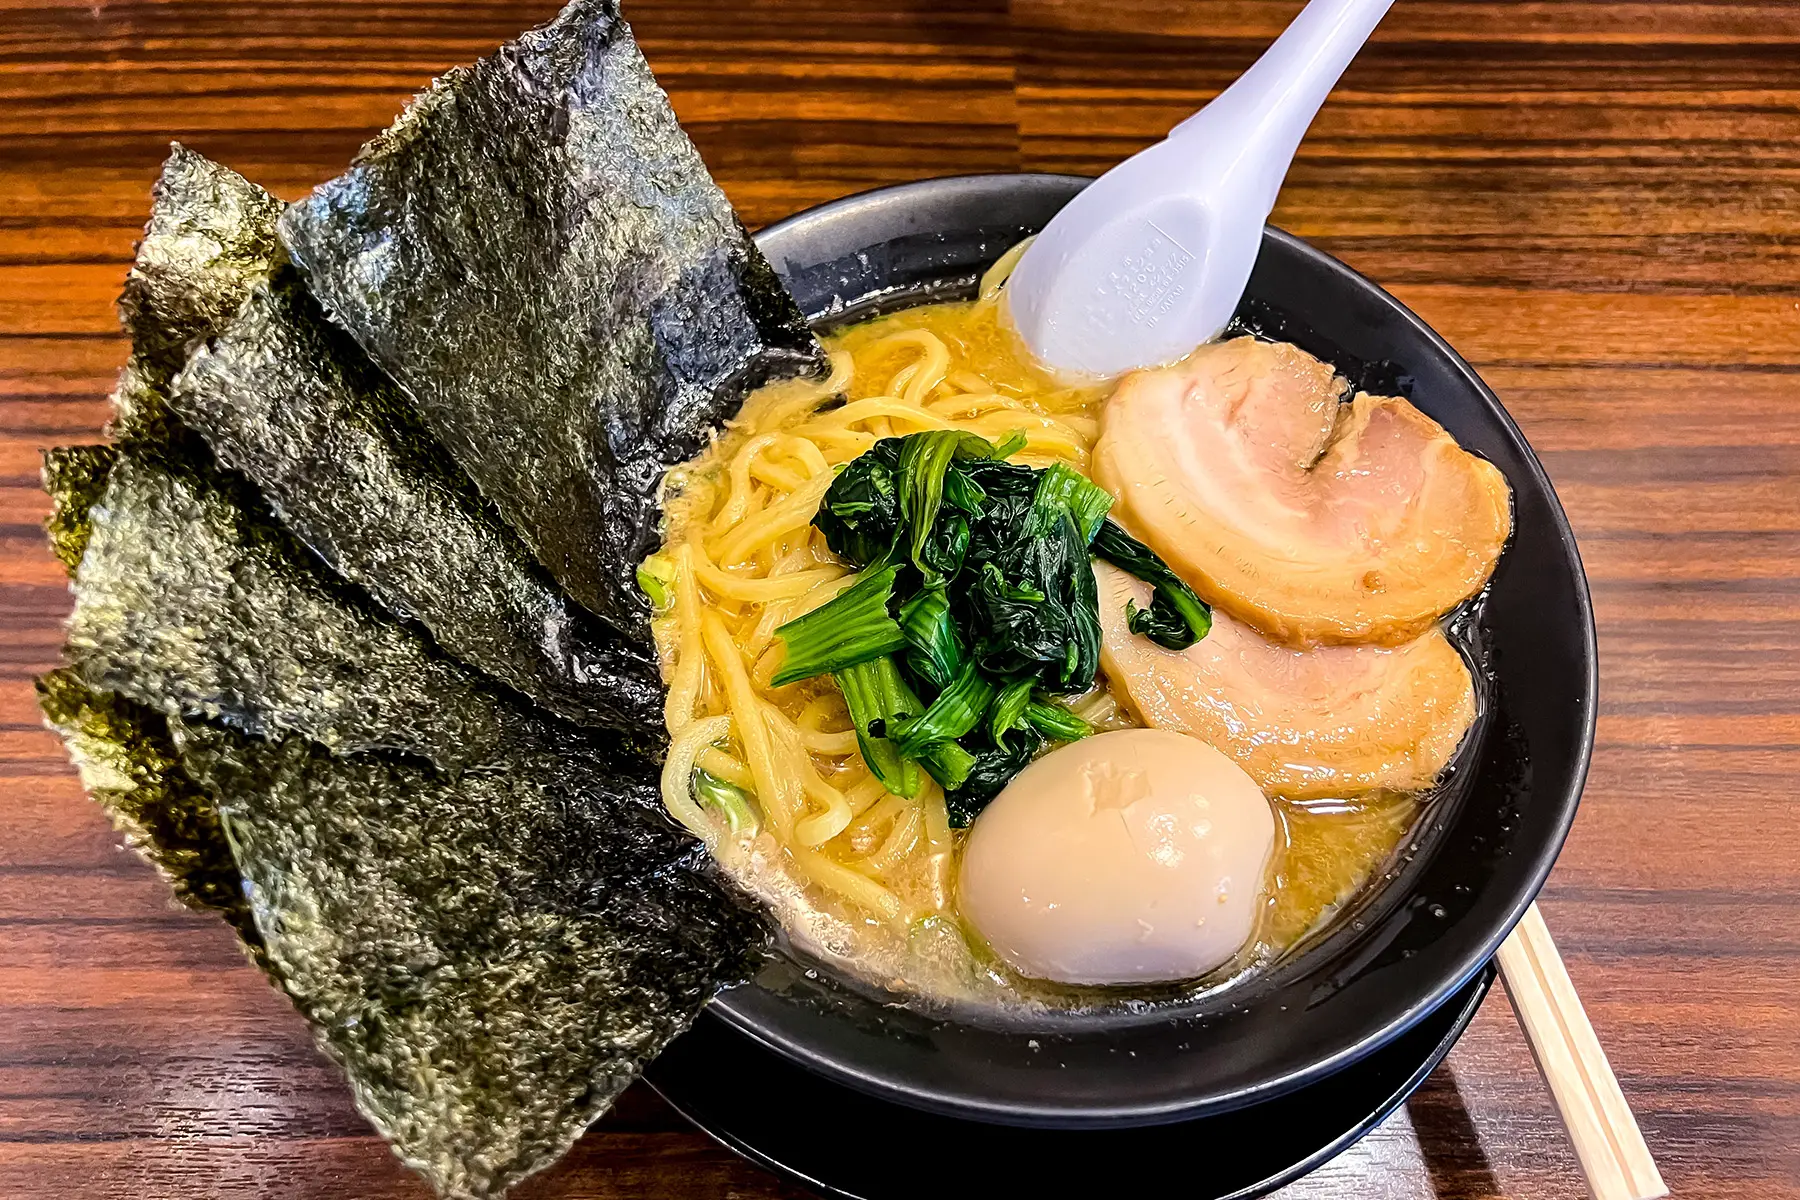 Tonkotsu ramen: a noodle soup with pork belly, soft-boiled egg, and nori (seaweed)